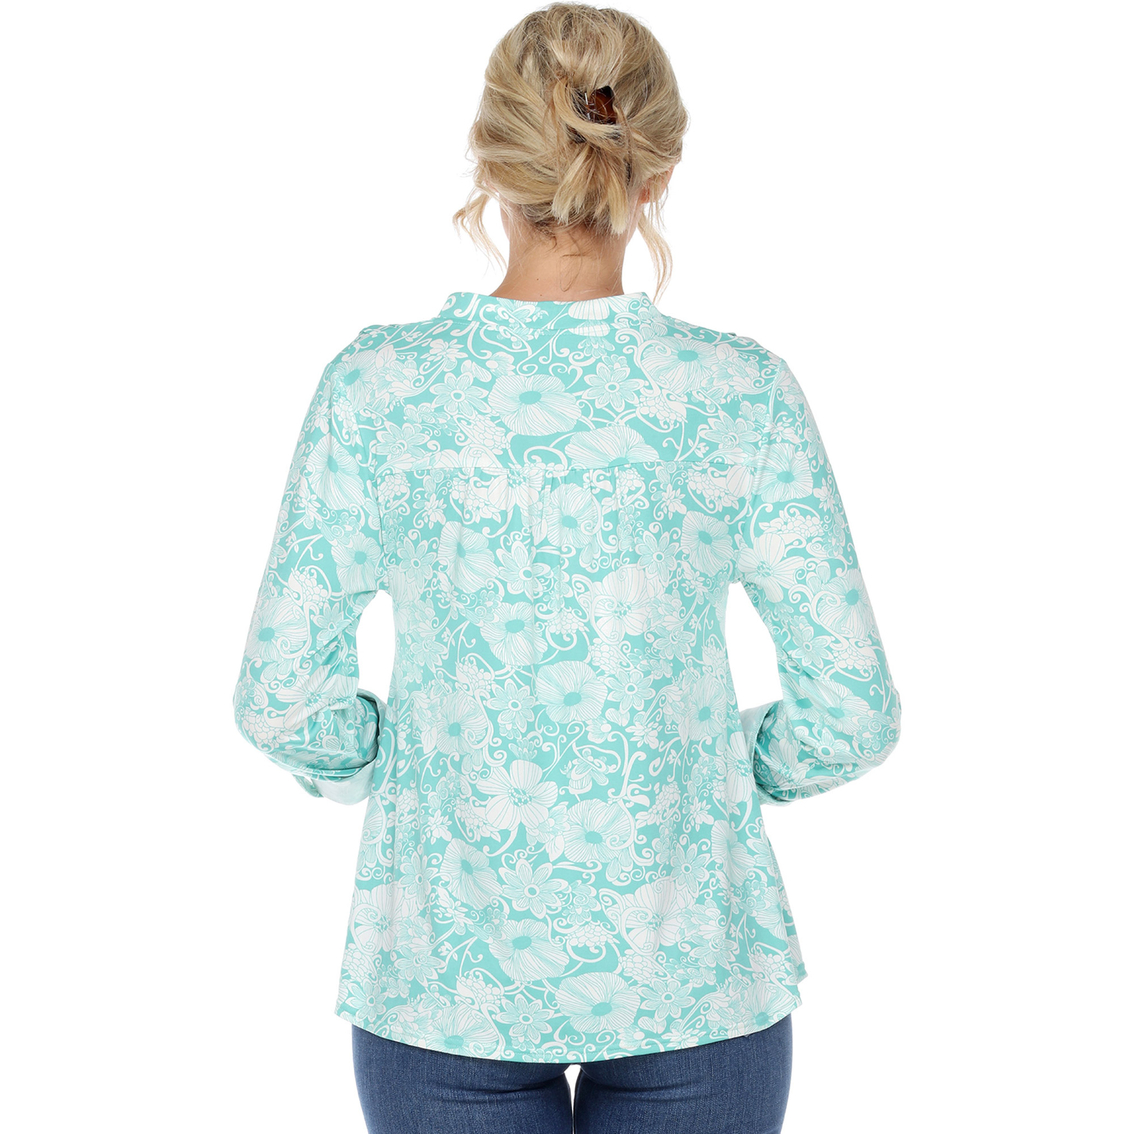 White Mark Pleated Floral Print Blouse Tunic Top - Image 2 of 5